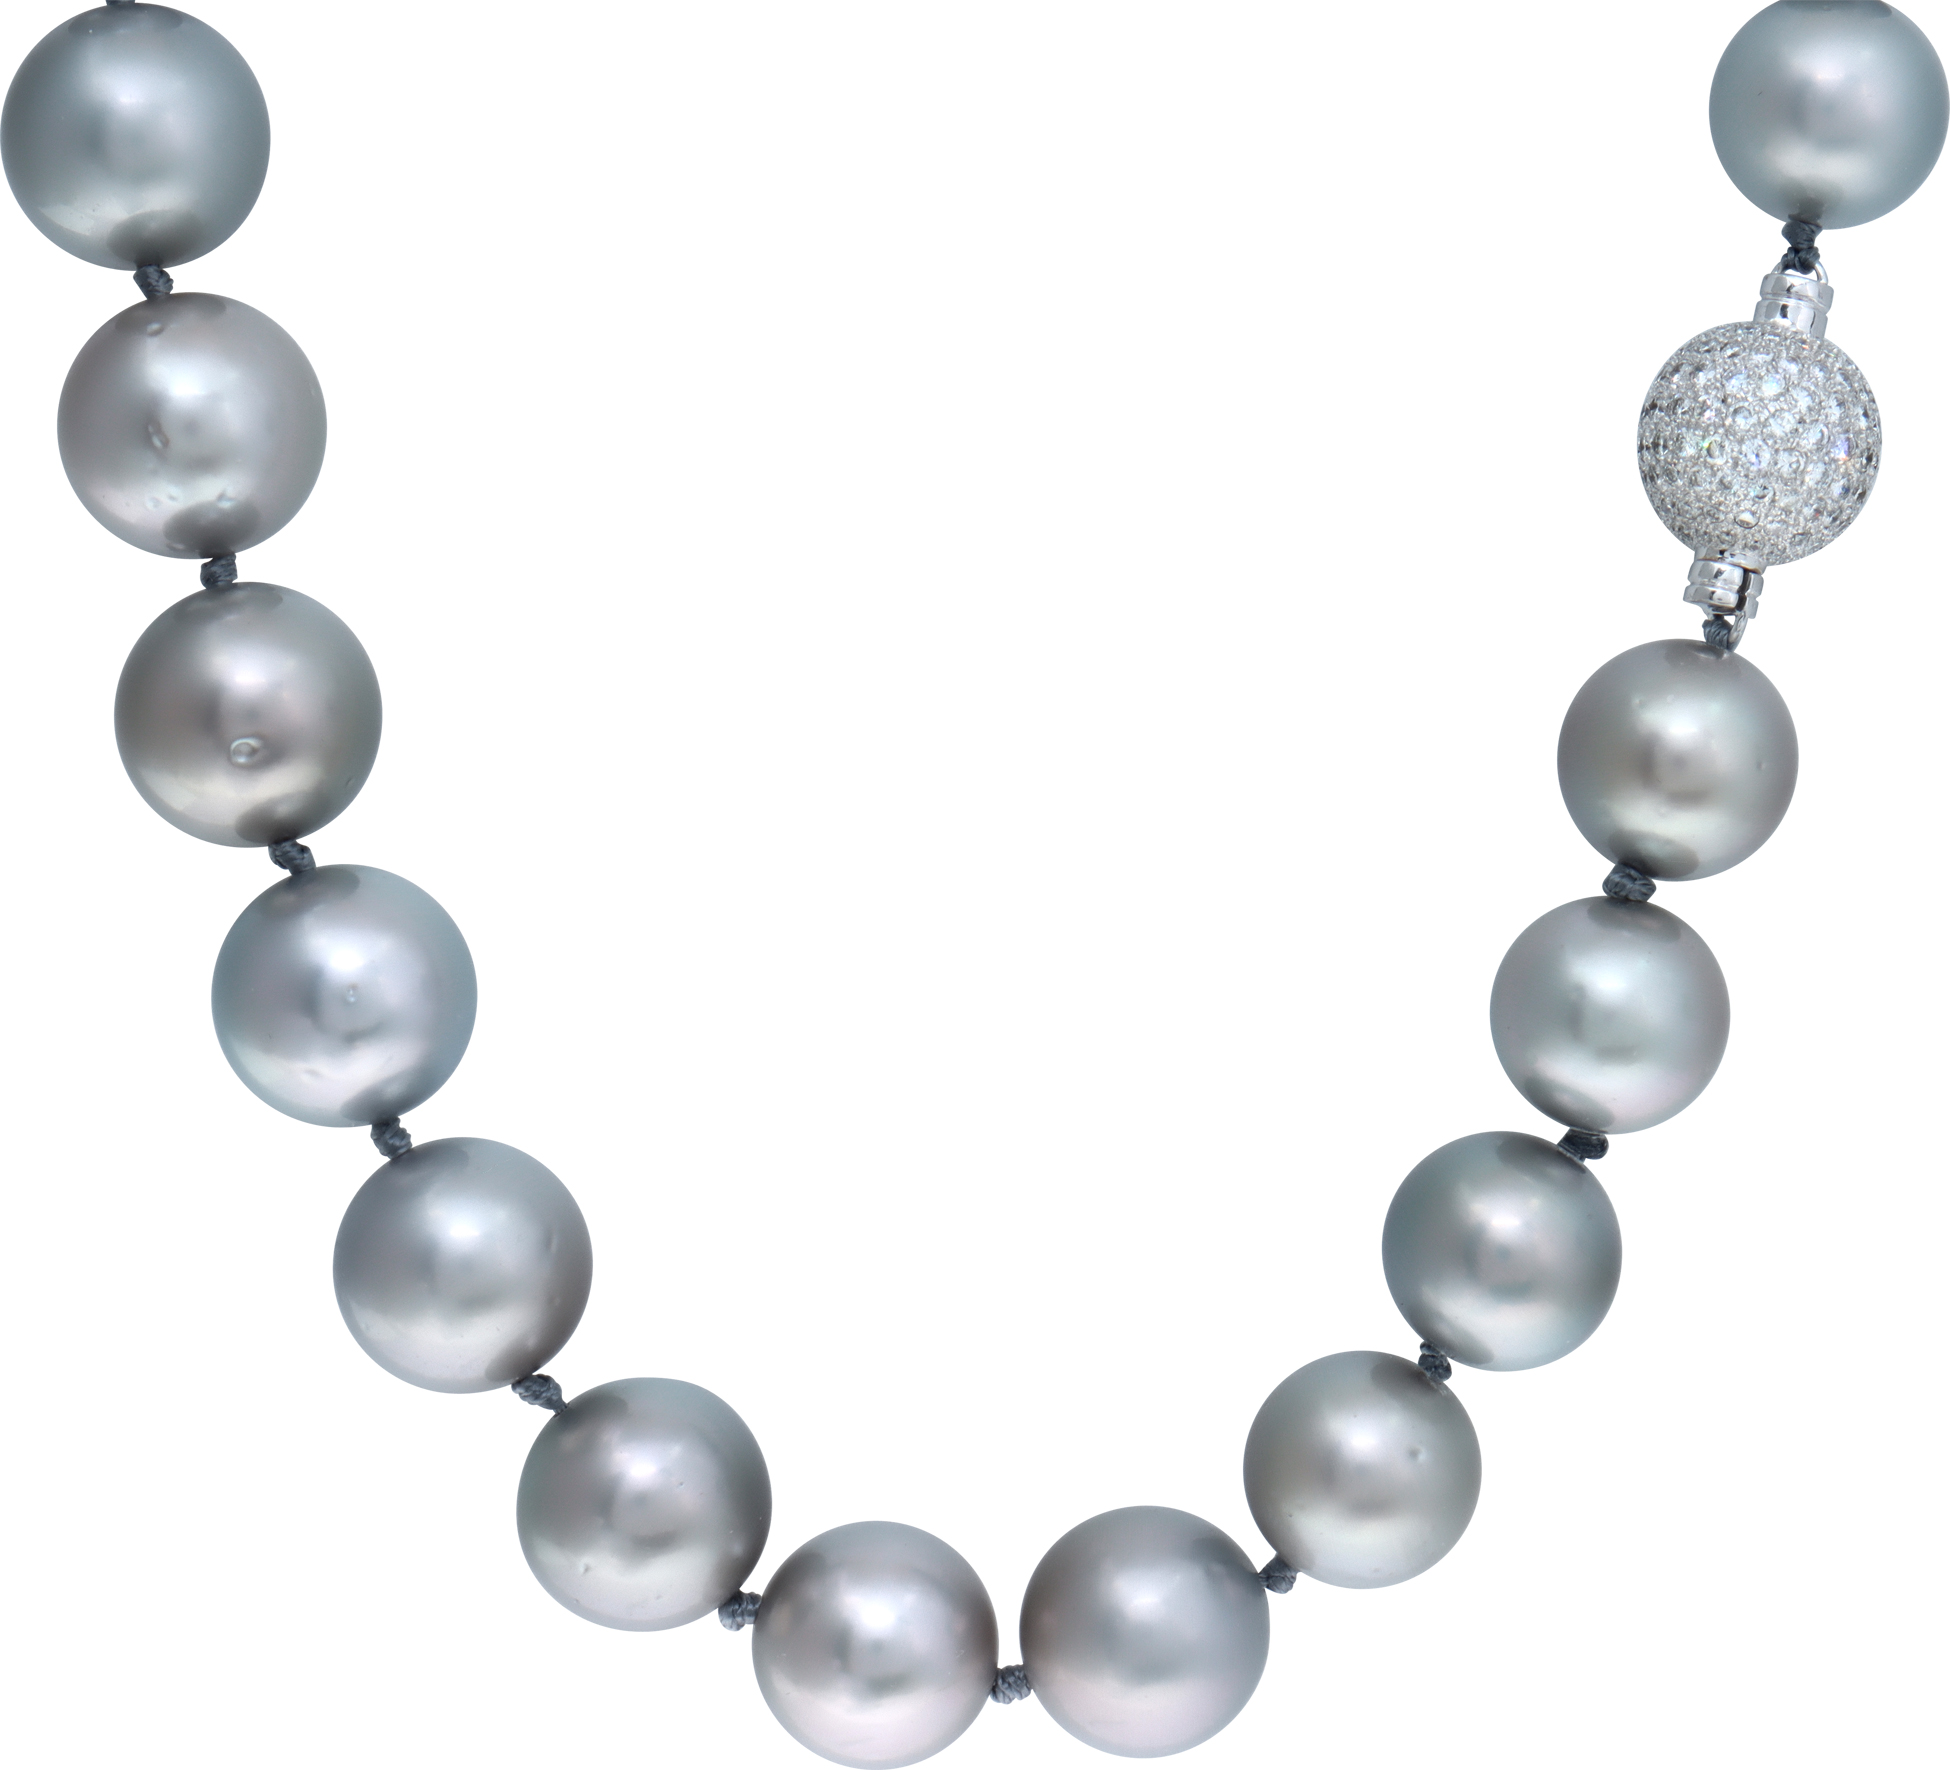 South sea pearl necklace with 13.5 to 15.5 mm silver/gray pearls